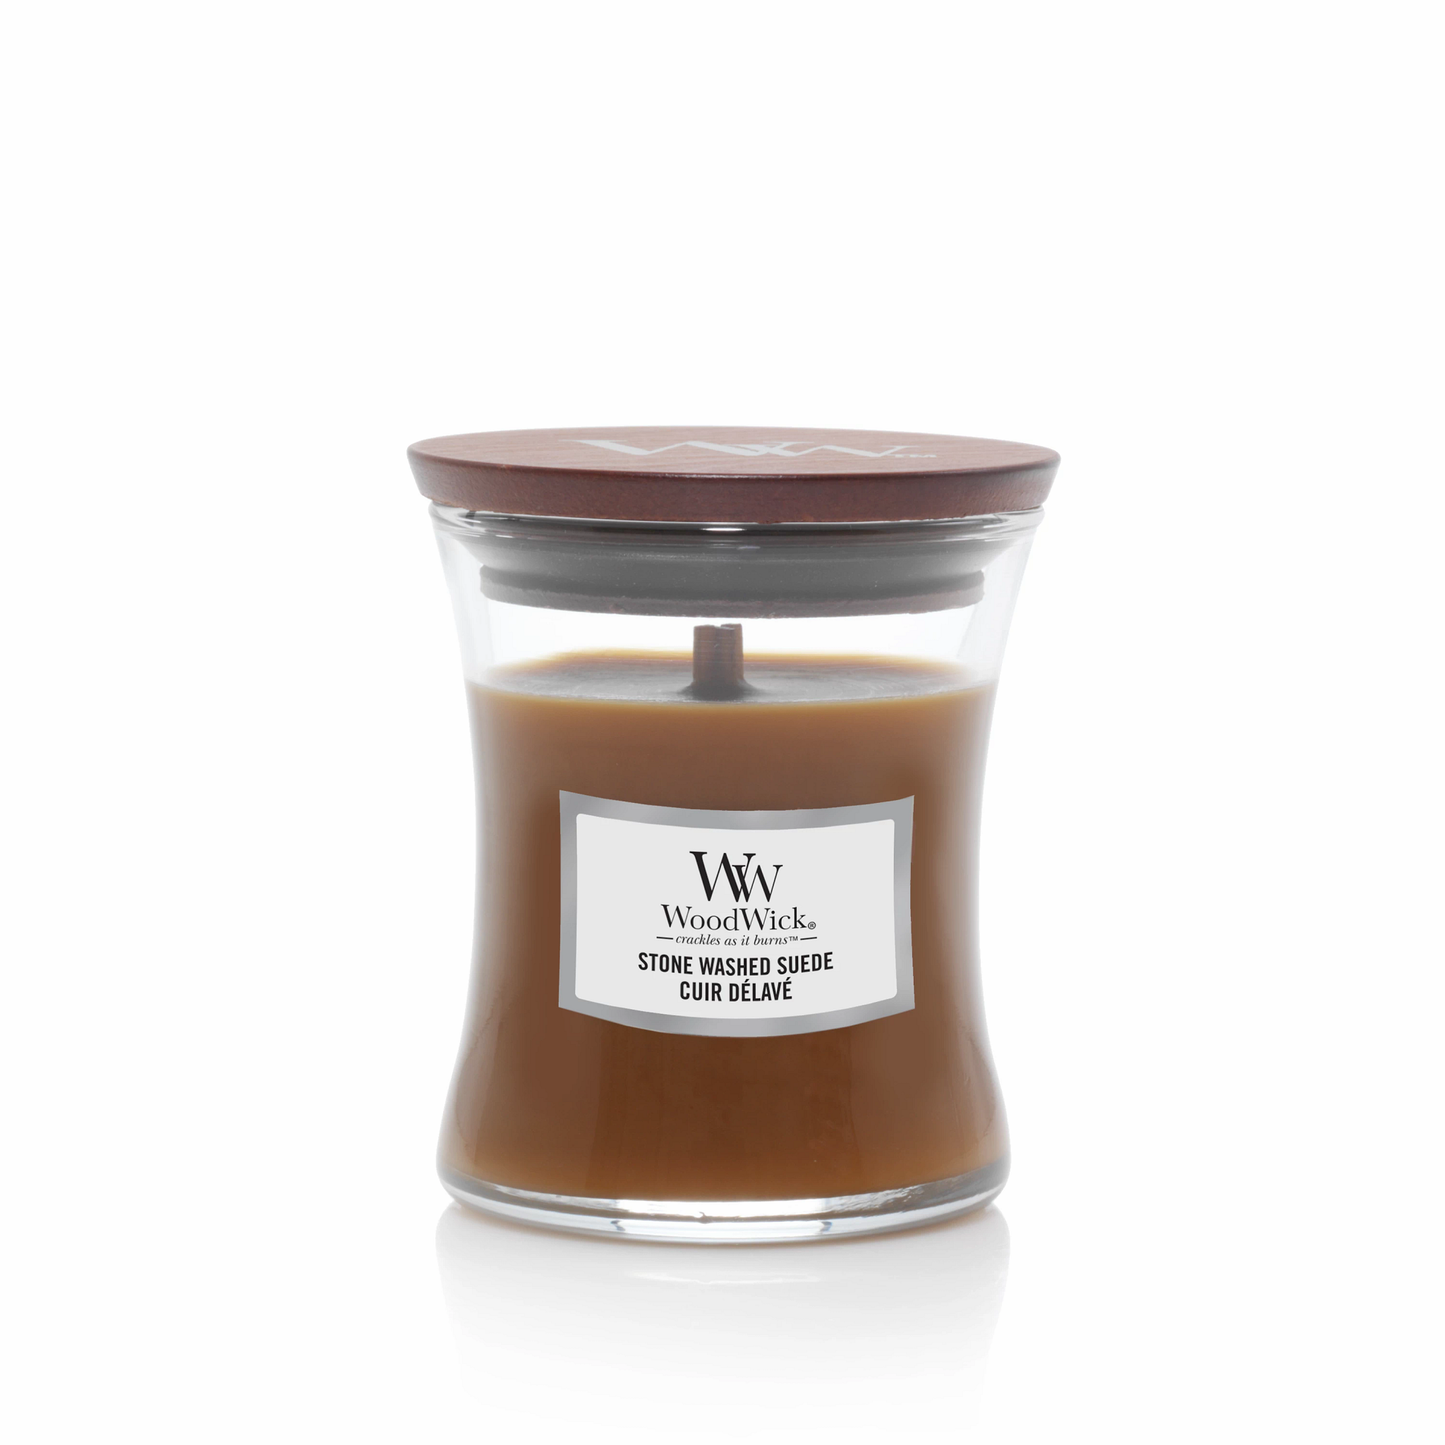 Woodwick - Candela Piccola Stone Washed Suede